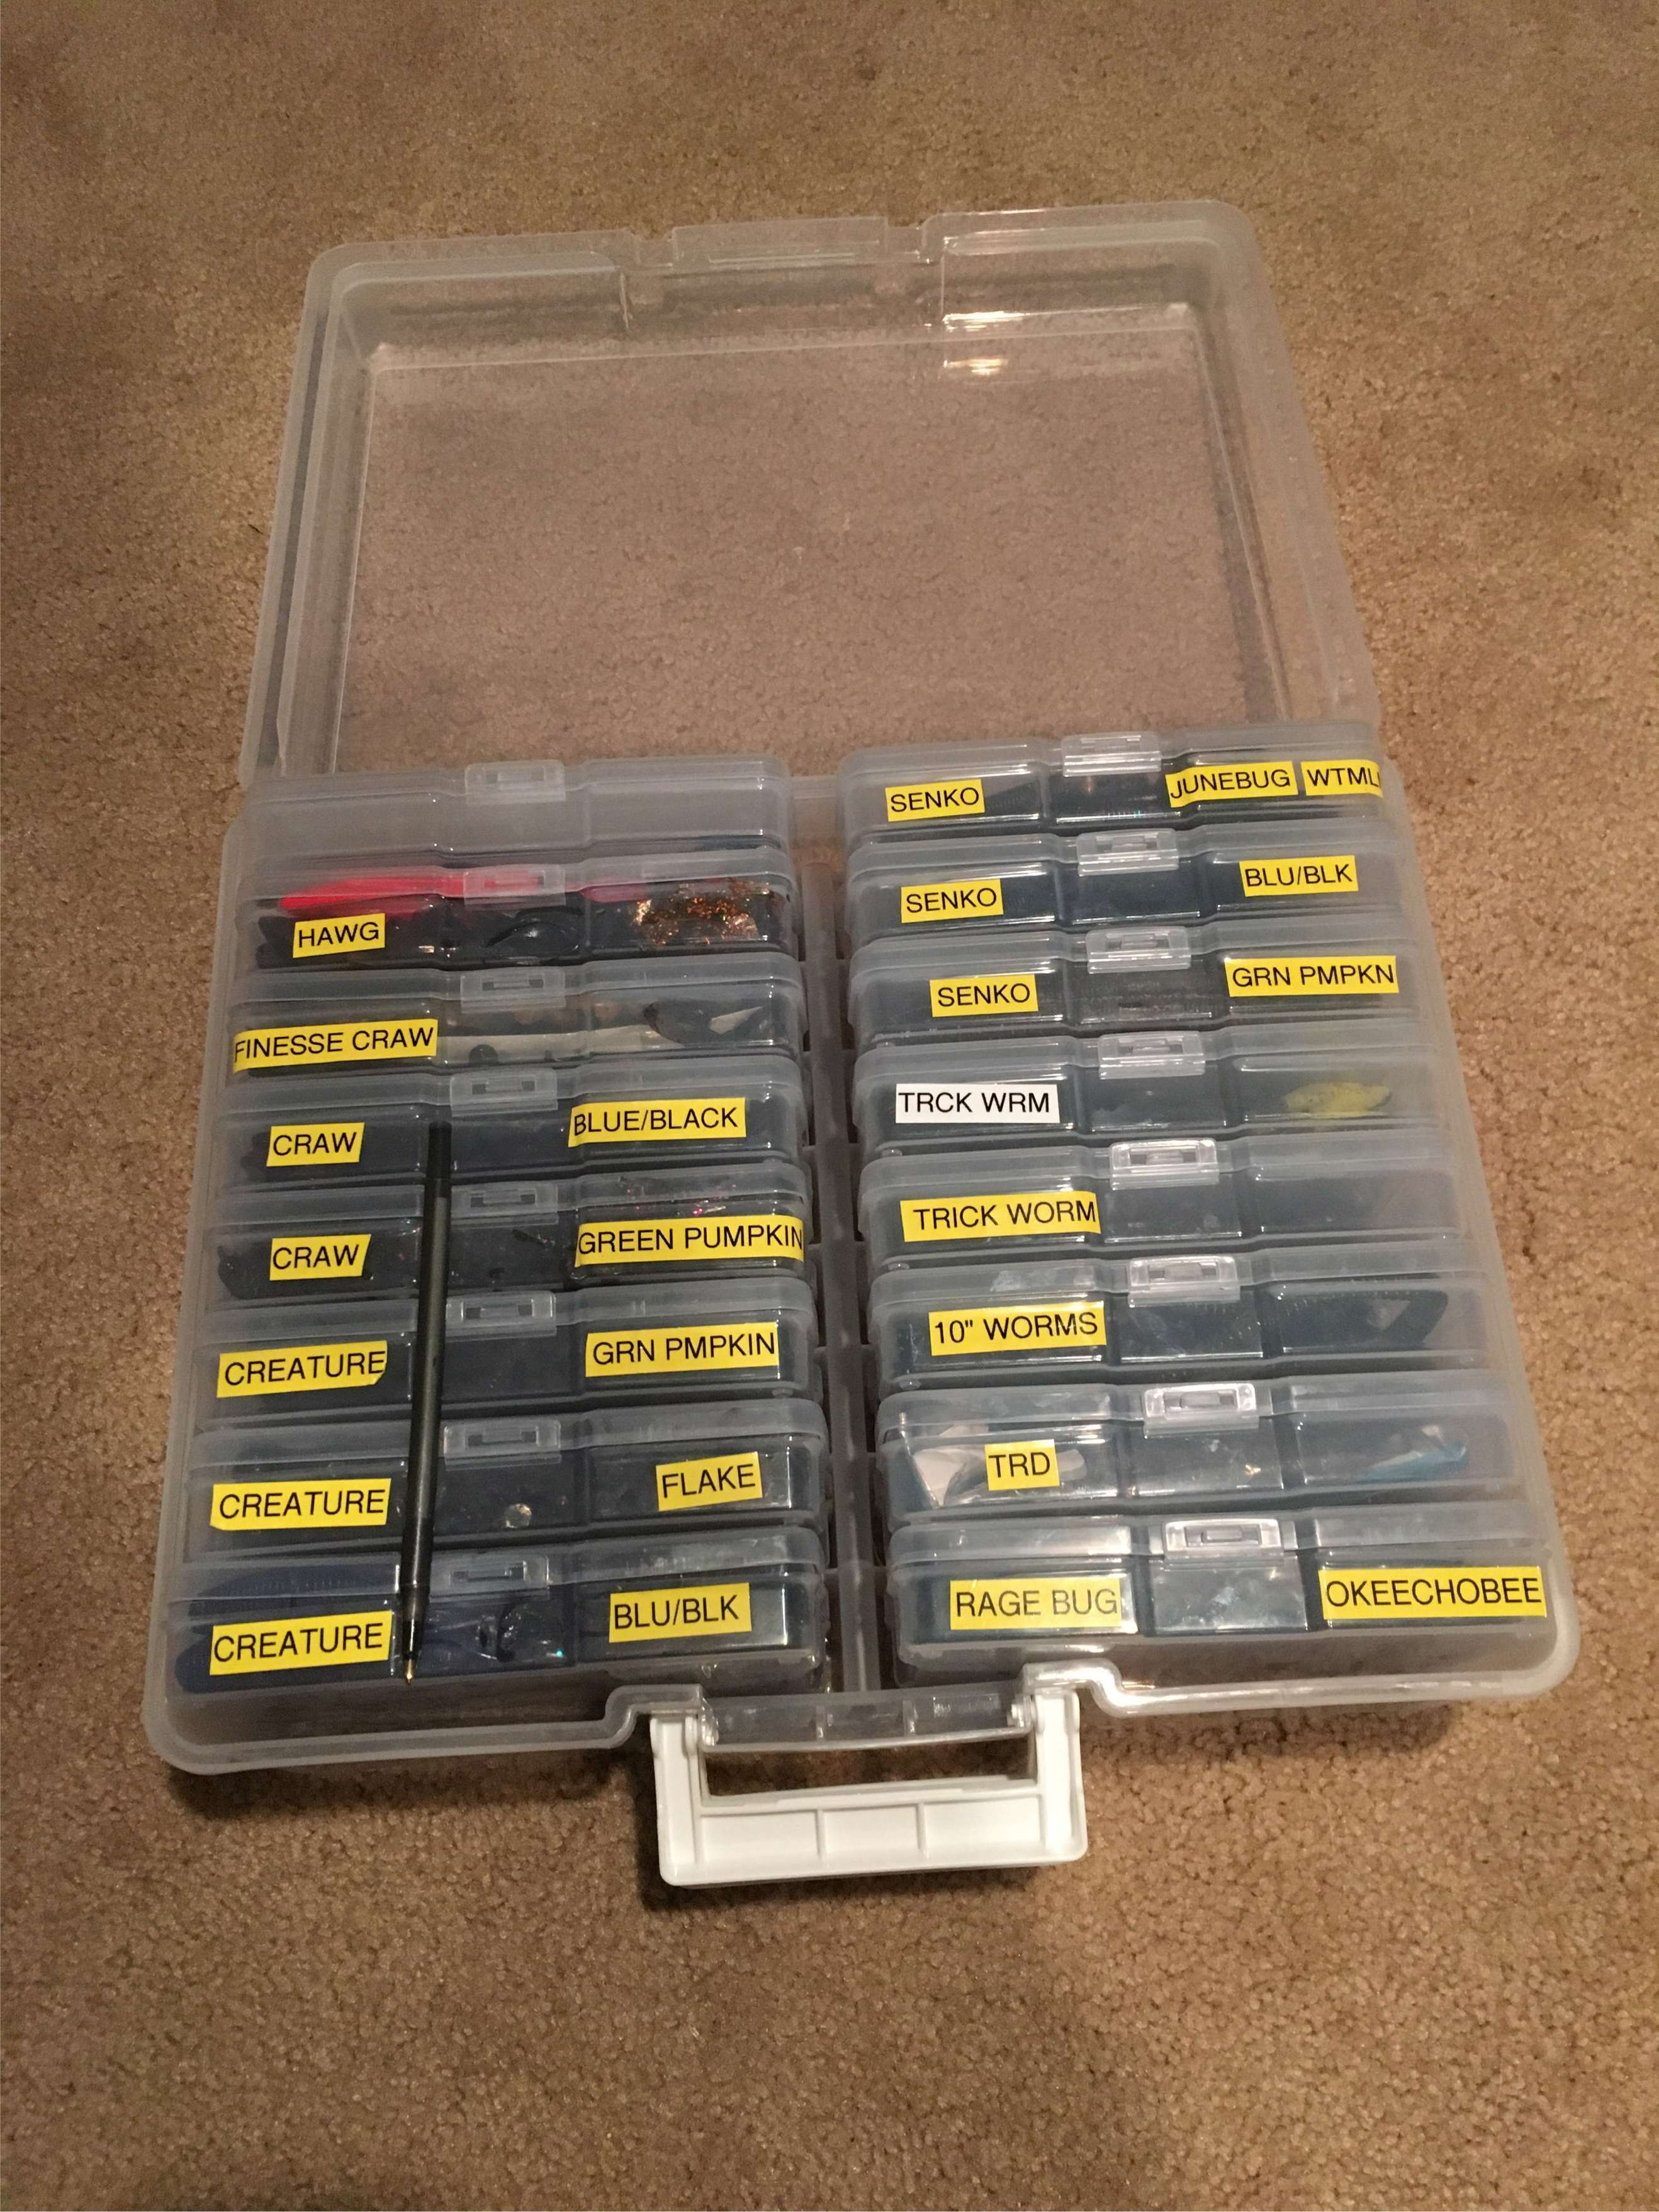 best tackle boxes for plastics? - Fishing Tackle - Bass Fishing Forums